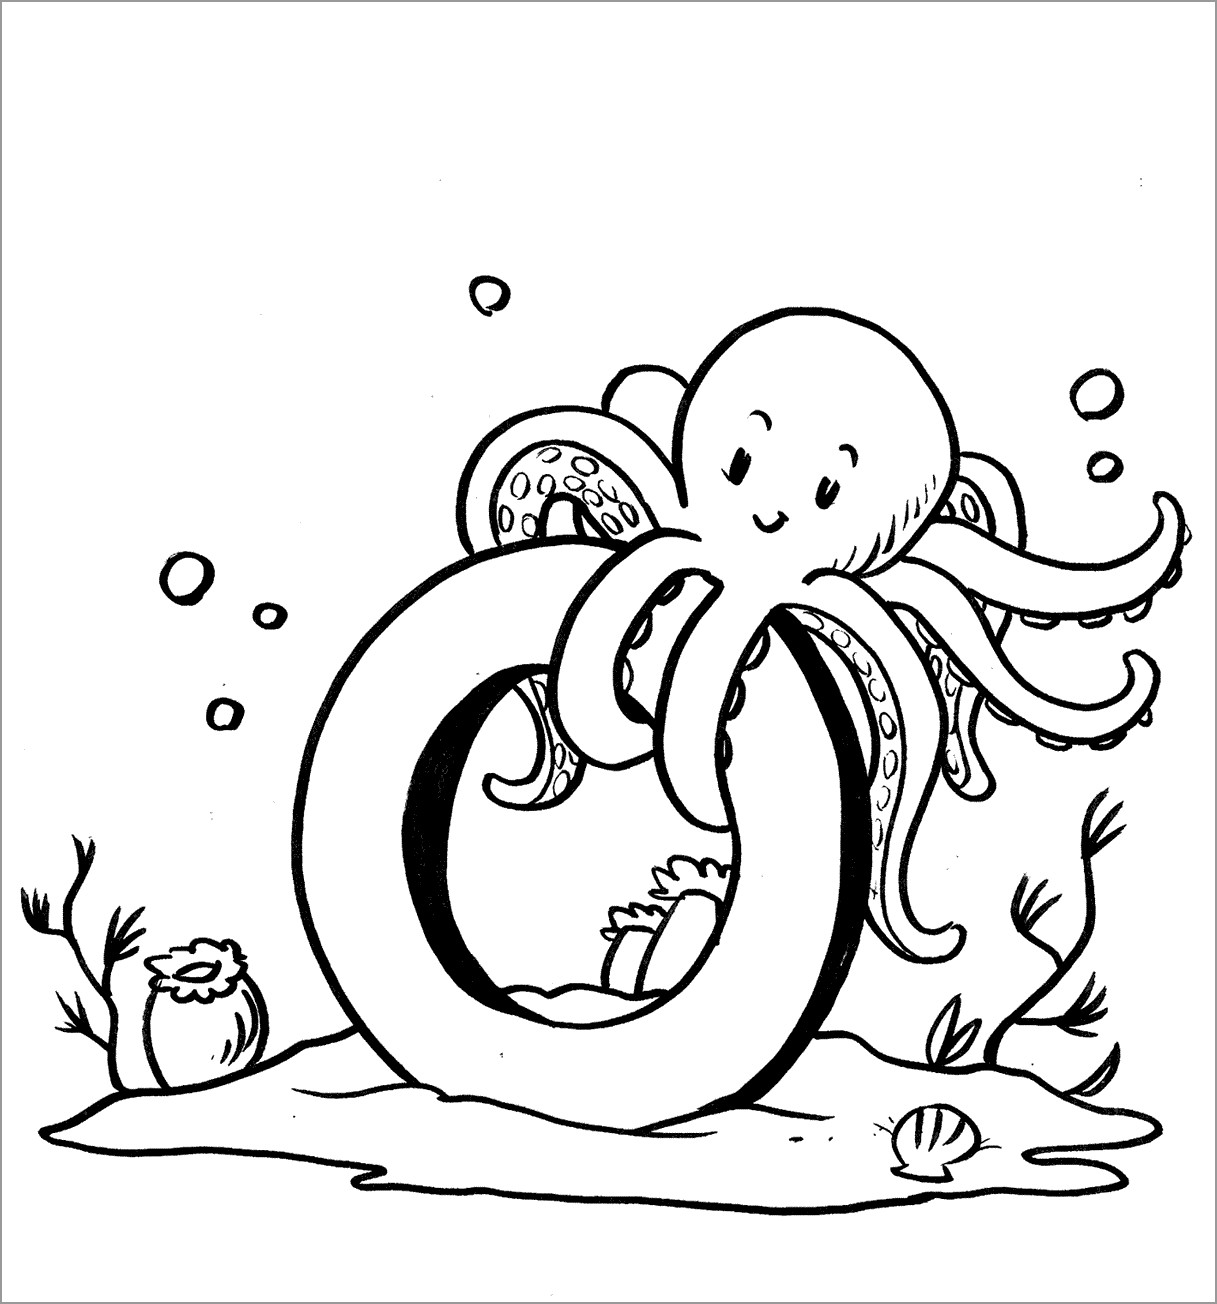 O for Octopus Coloring Page